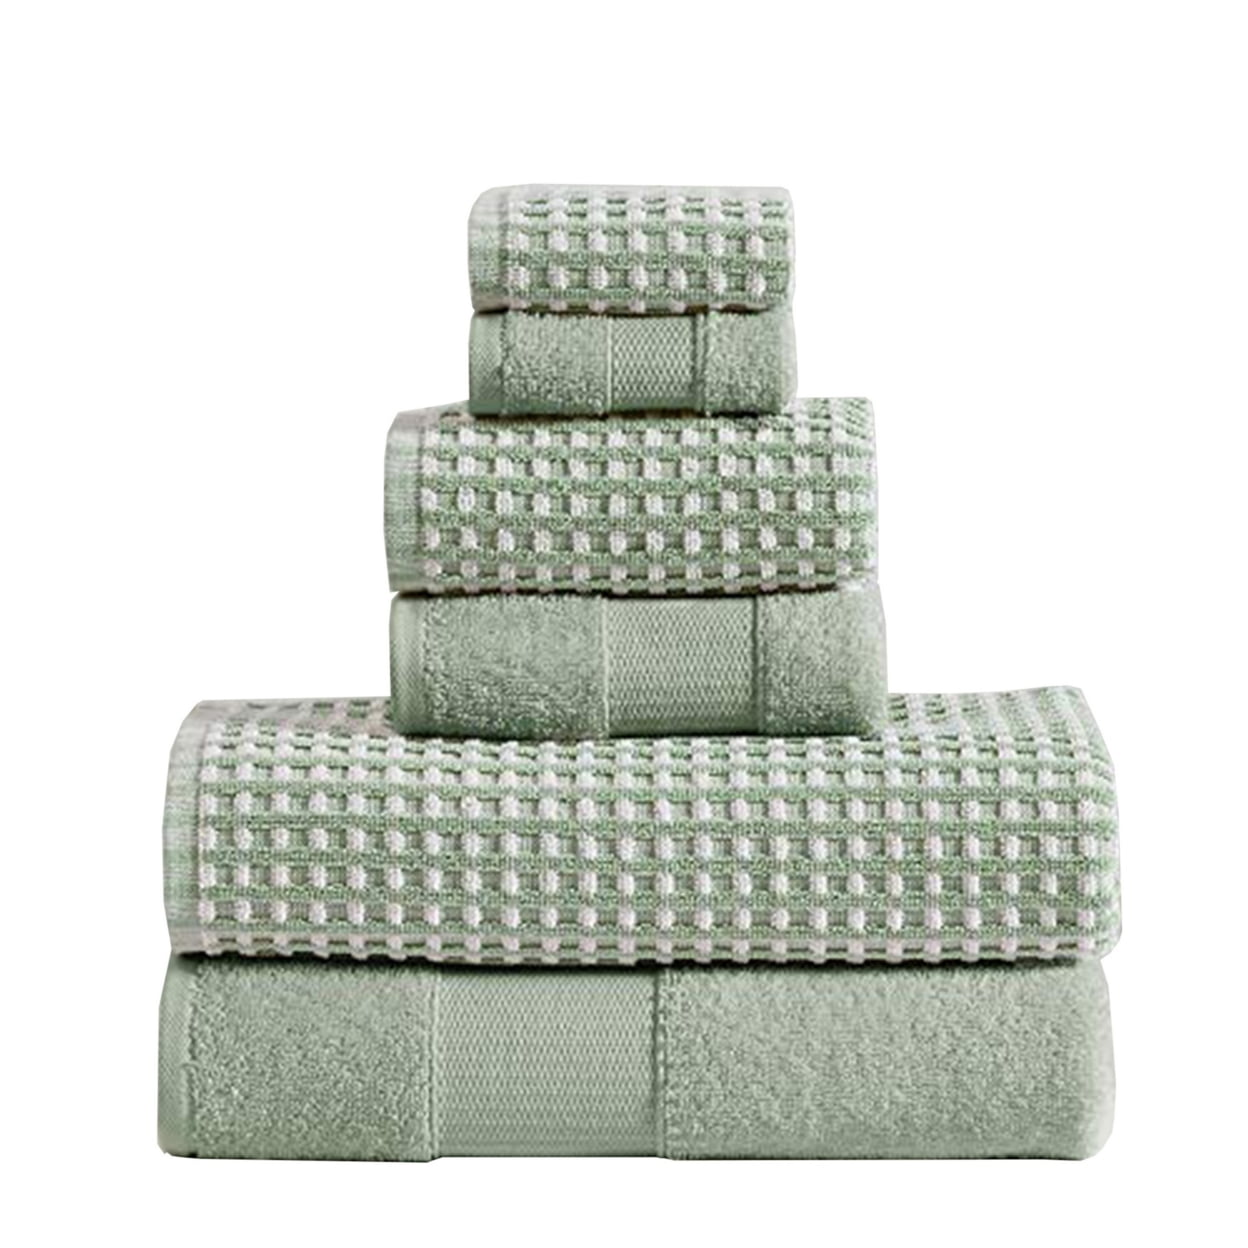 Picture of The Urban Port BM222847 Porto Dual Tone Towel Set with Jacquard Grid Pattern, Green - 6 Piece